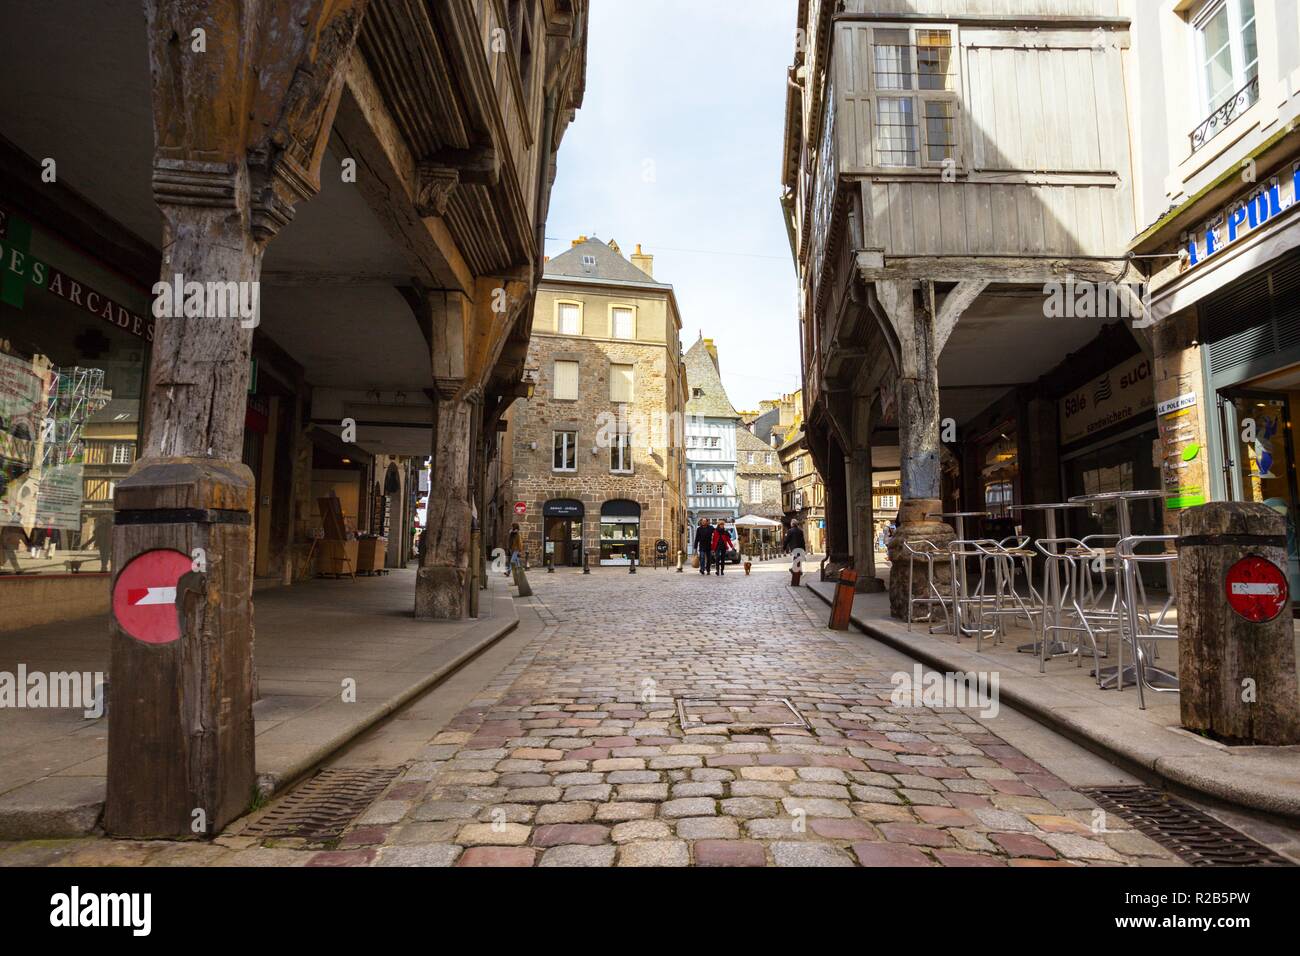 DINAN, FRANCE - APRIL 6, 2018: beautiful streets with colombage houses in the famous city of Dinan. Normandy, France Stock Photo